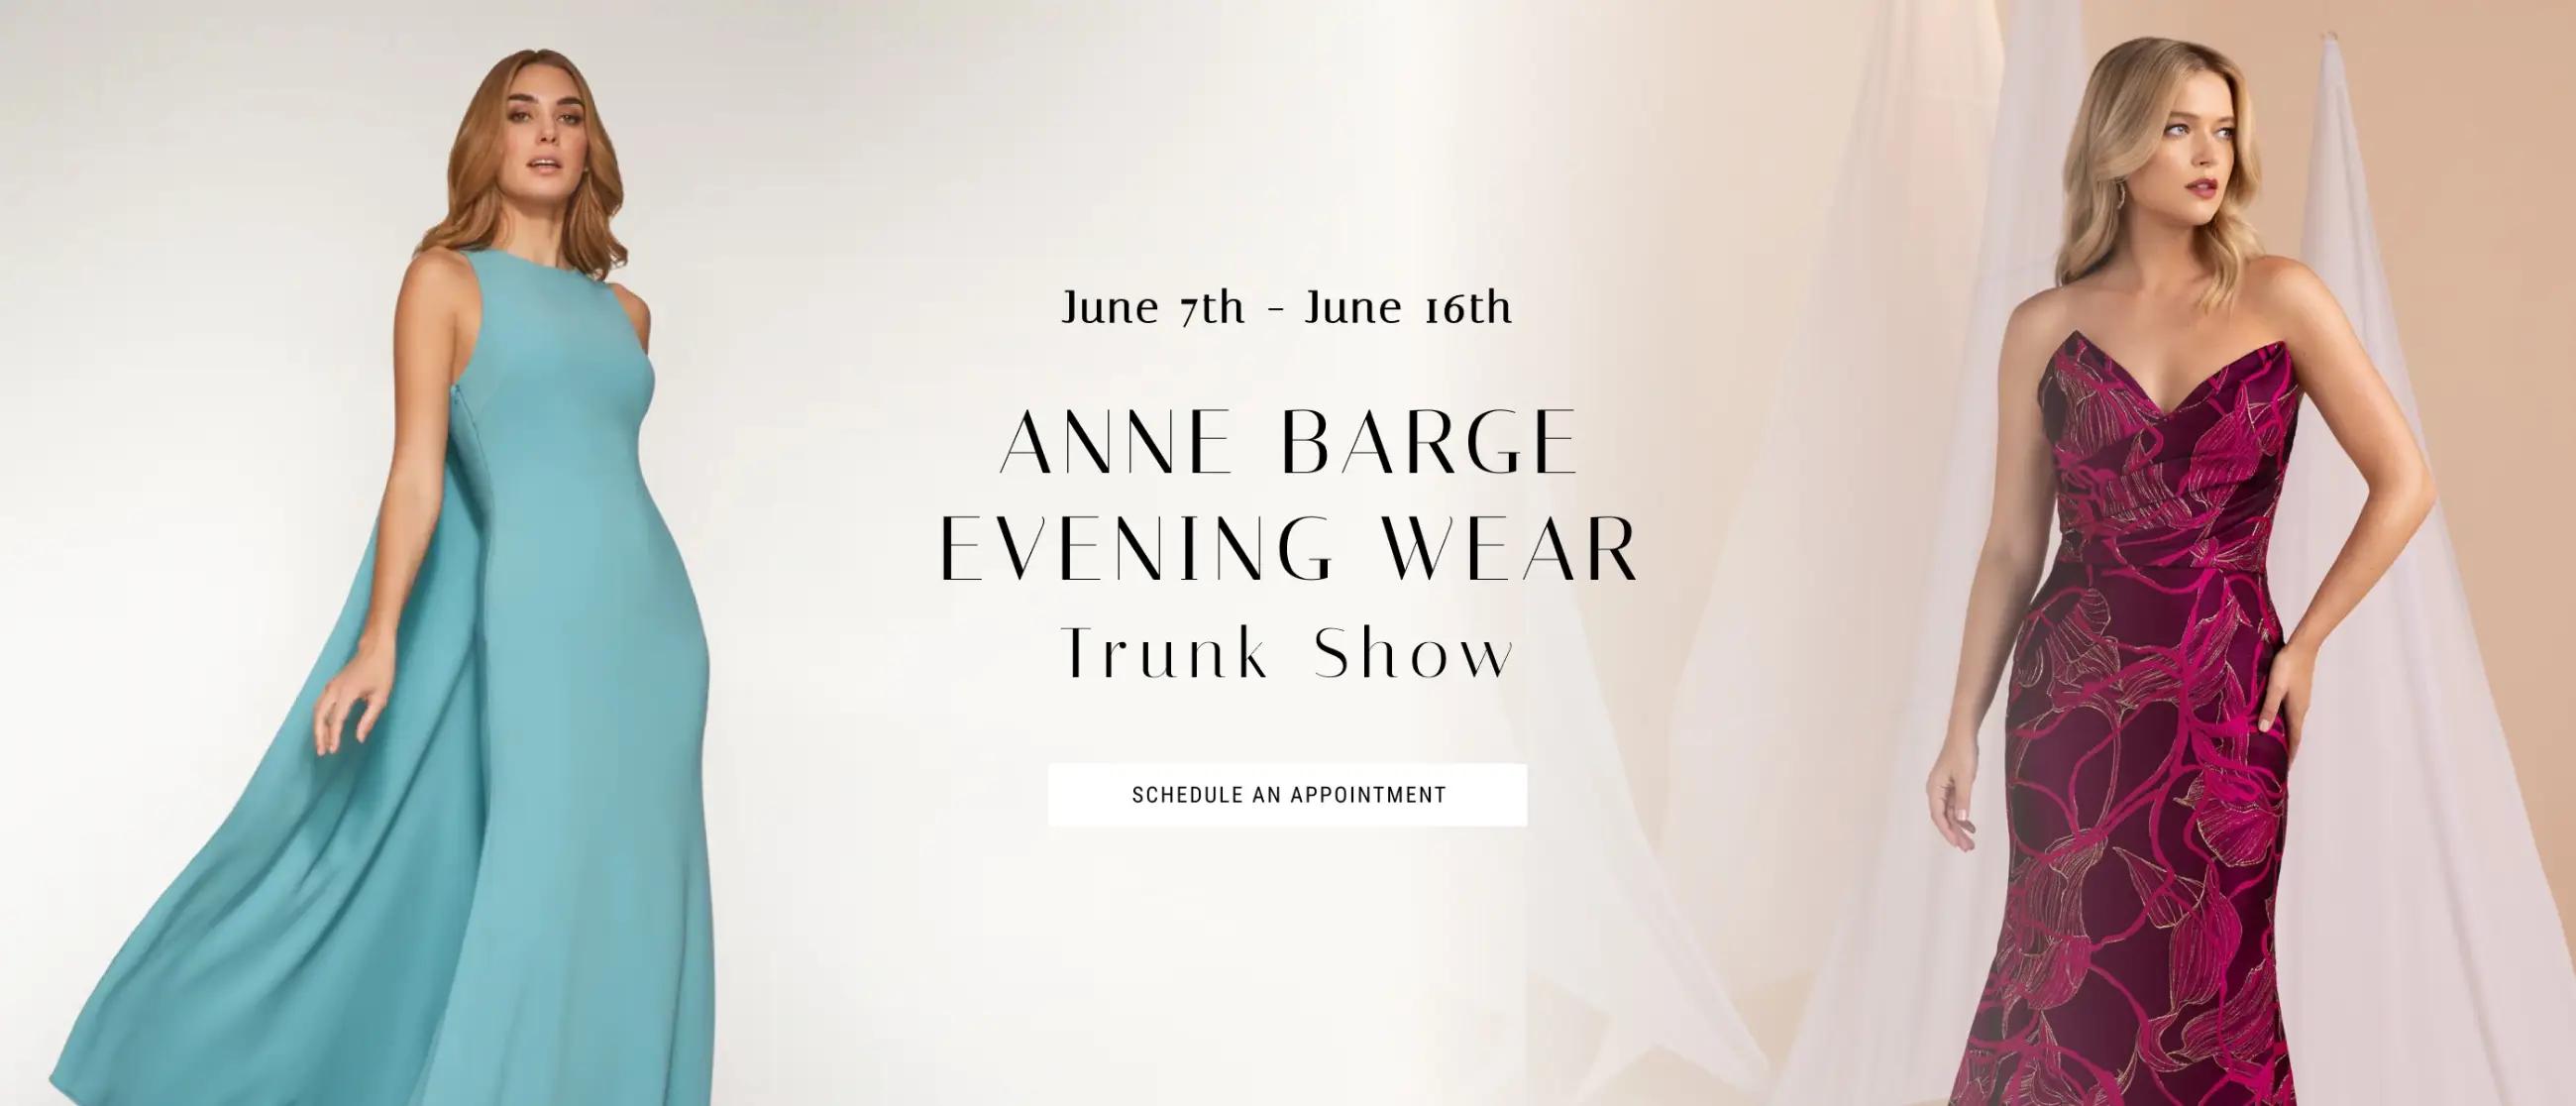 Anne Barge Evening Wear Trunk Show Banner